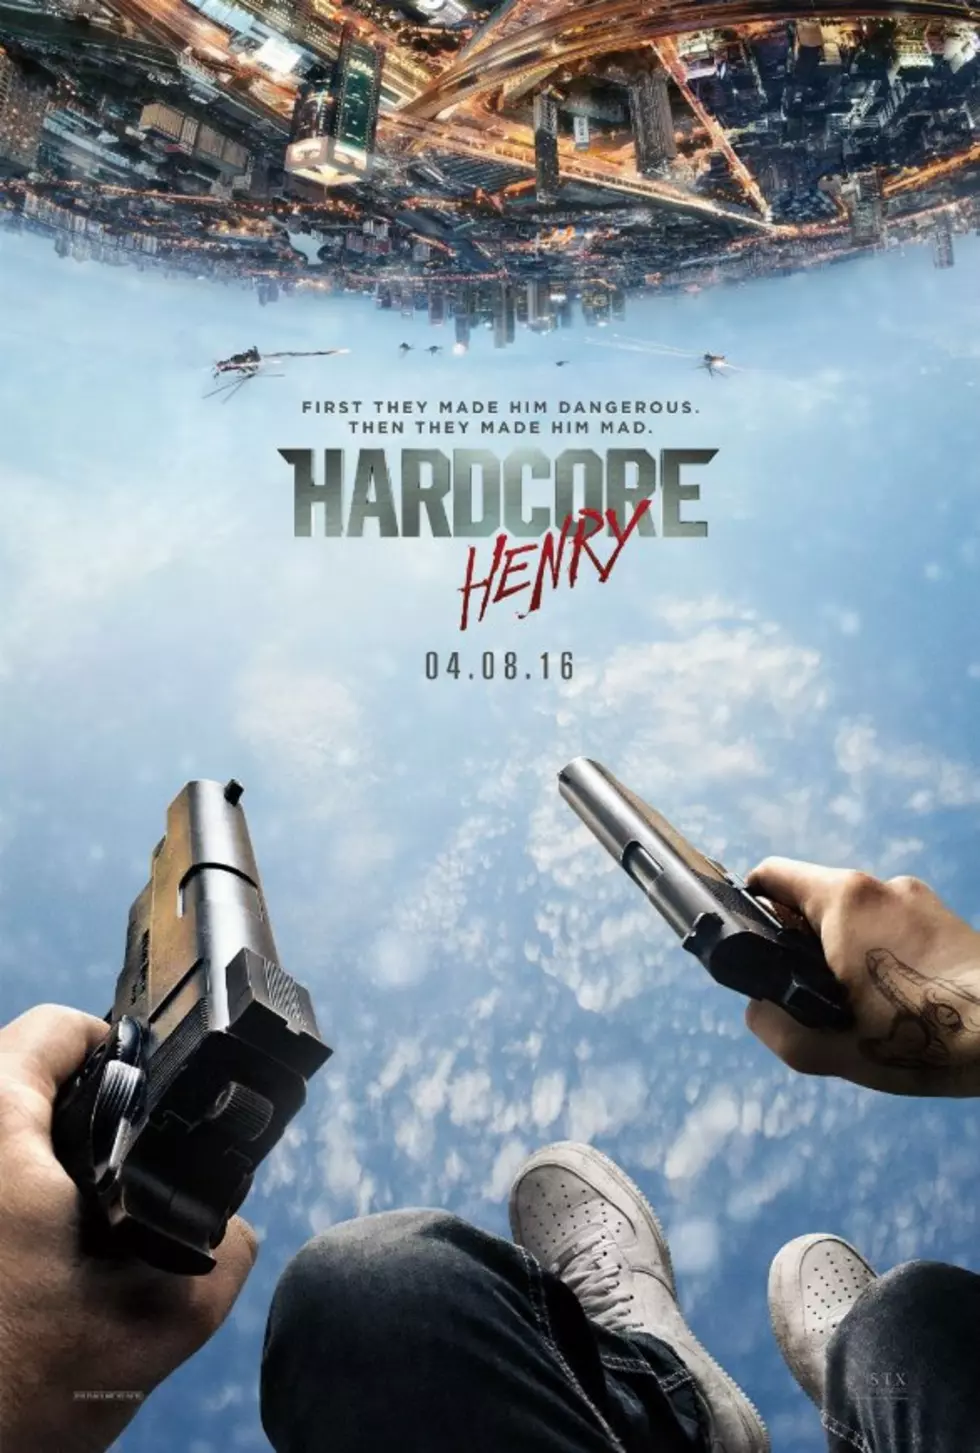 REVIEW: Hardcore Henry